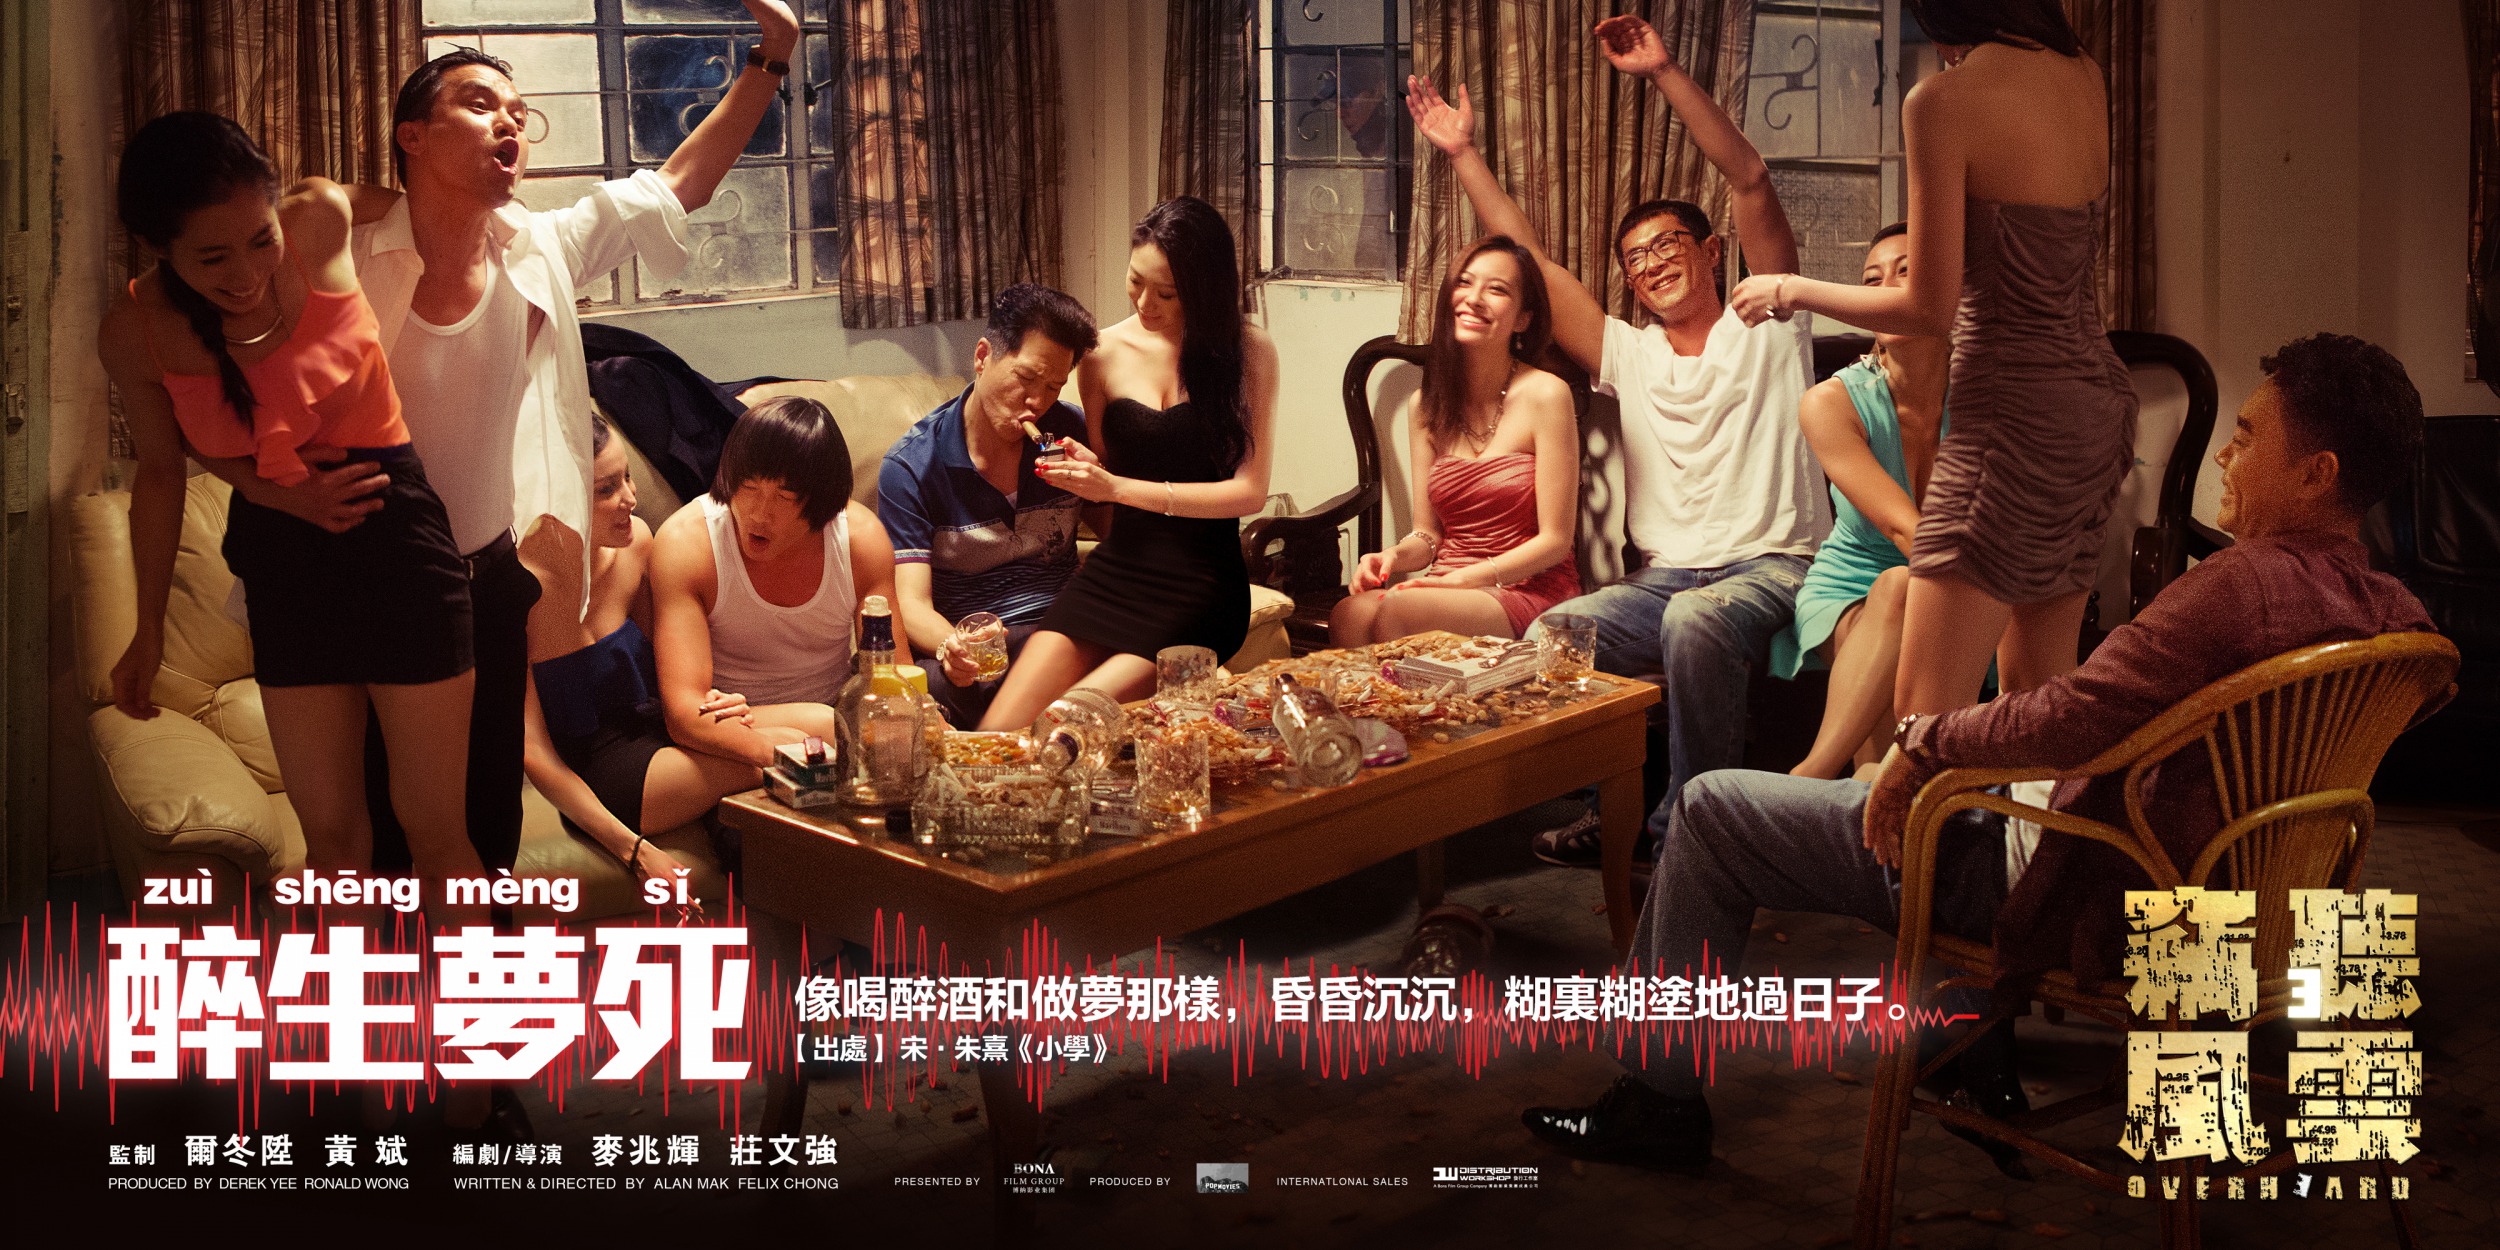 Mega Sized Movie Poster Image for Sit ting fung wan 3 (#3 of 7)